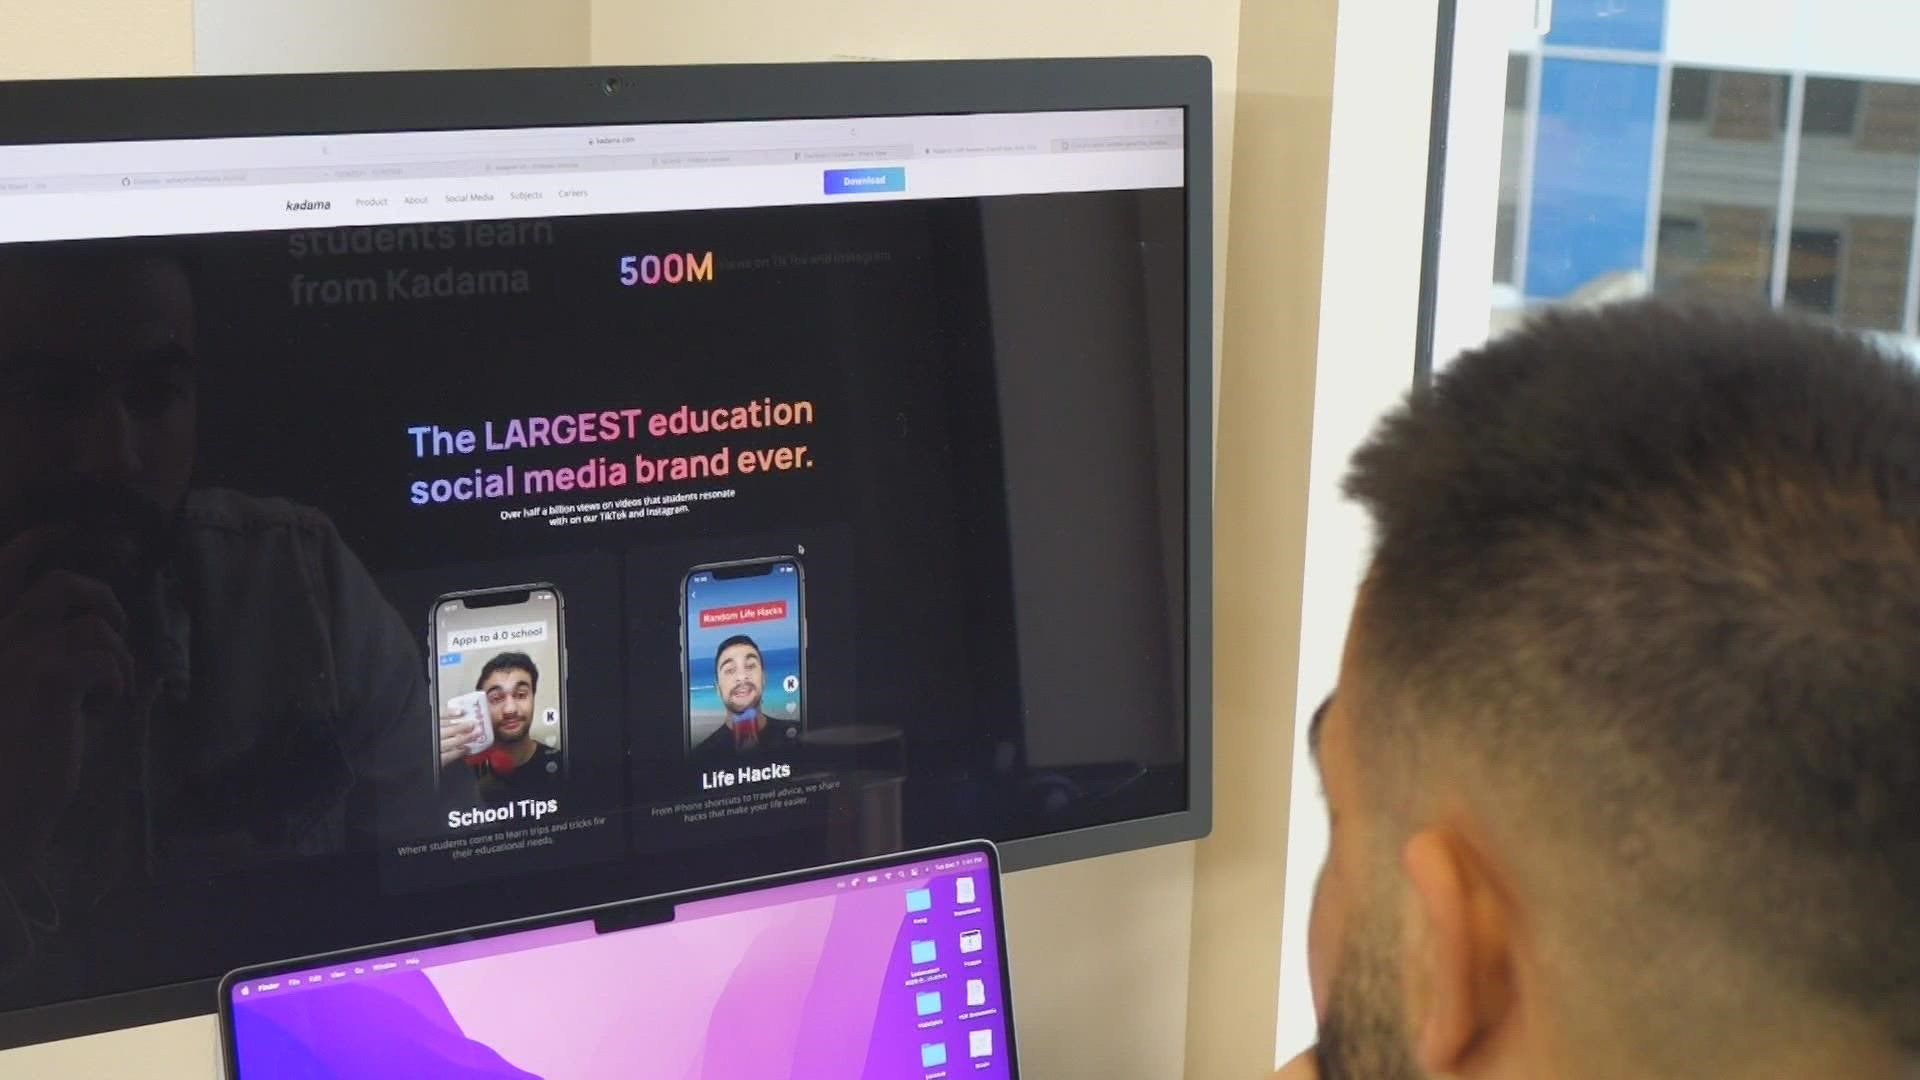 Founders of Kadama, the education app, were showed up on Forbes' "30 under 30" list for education.